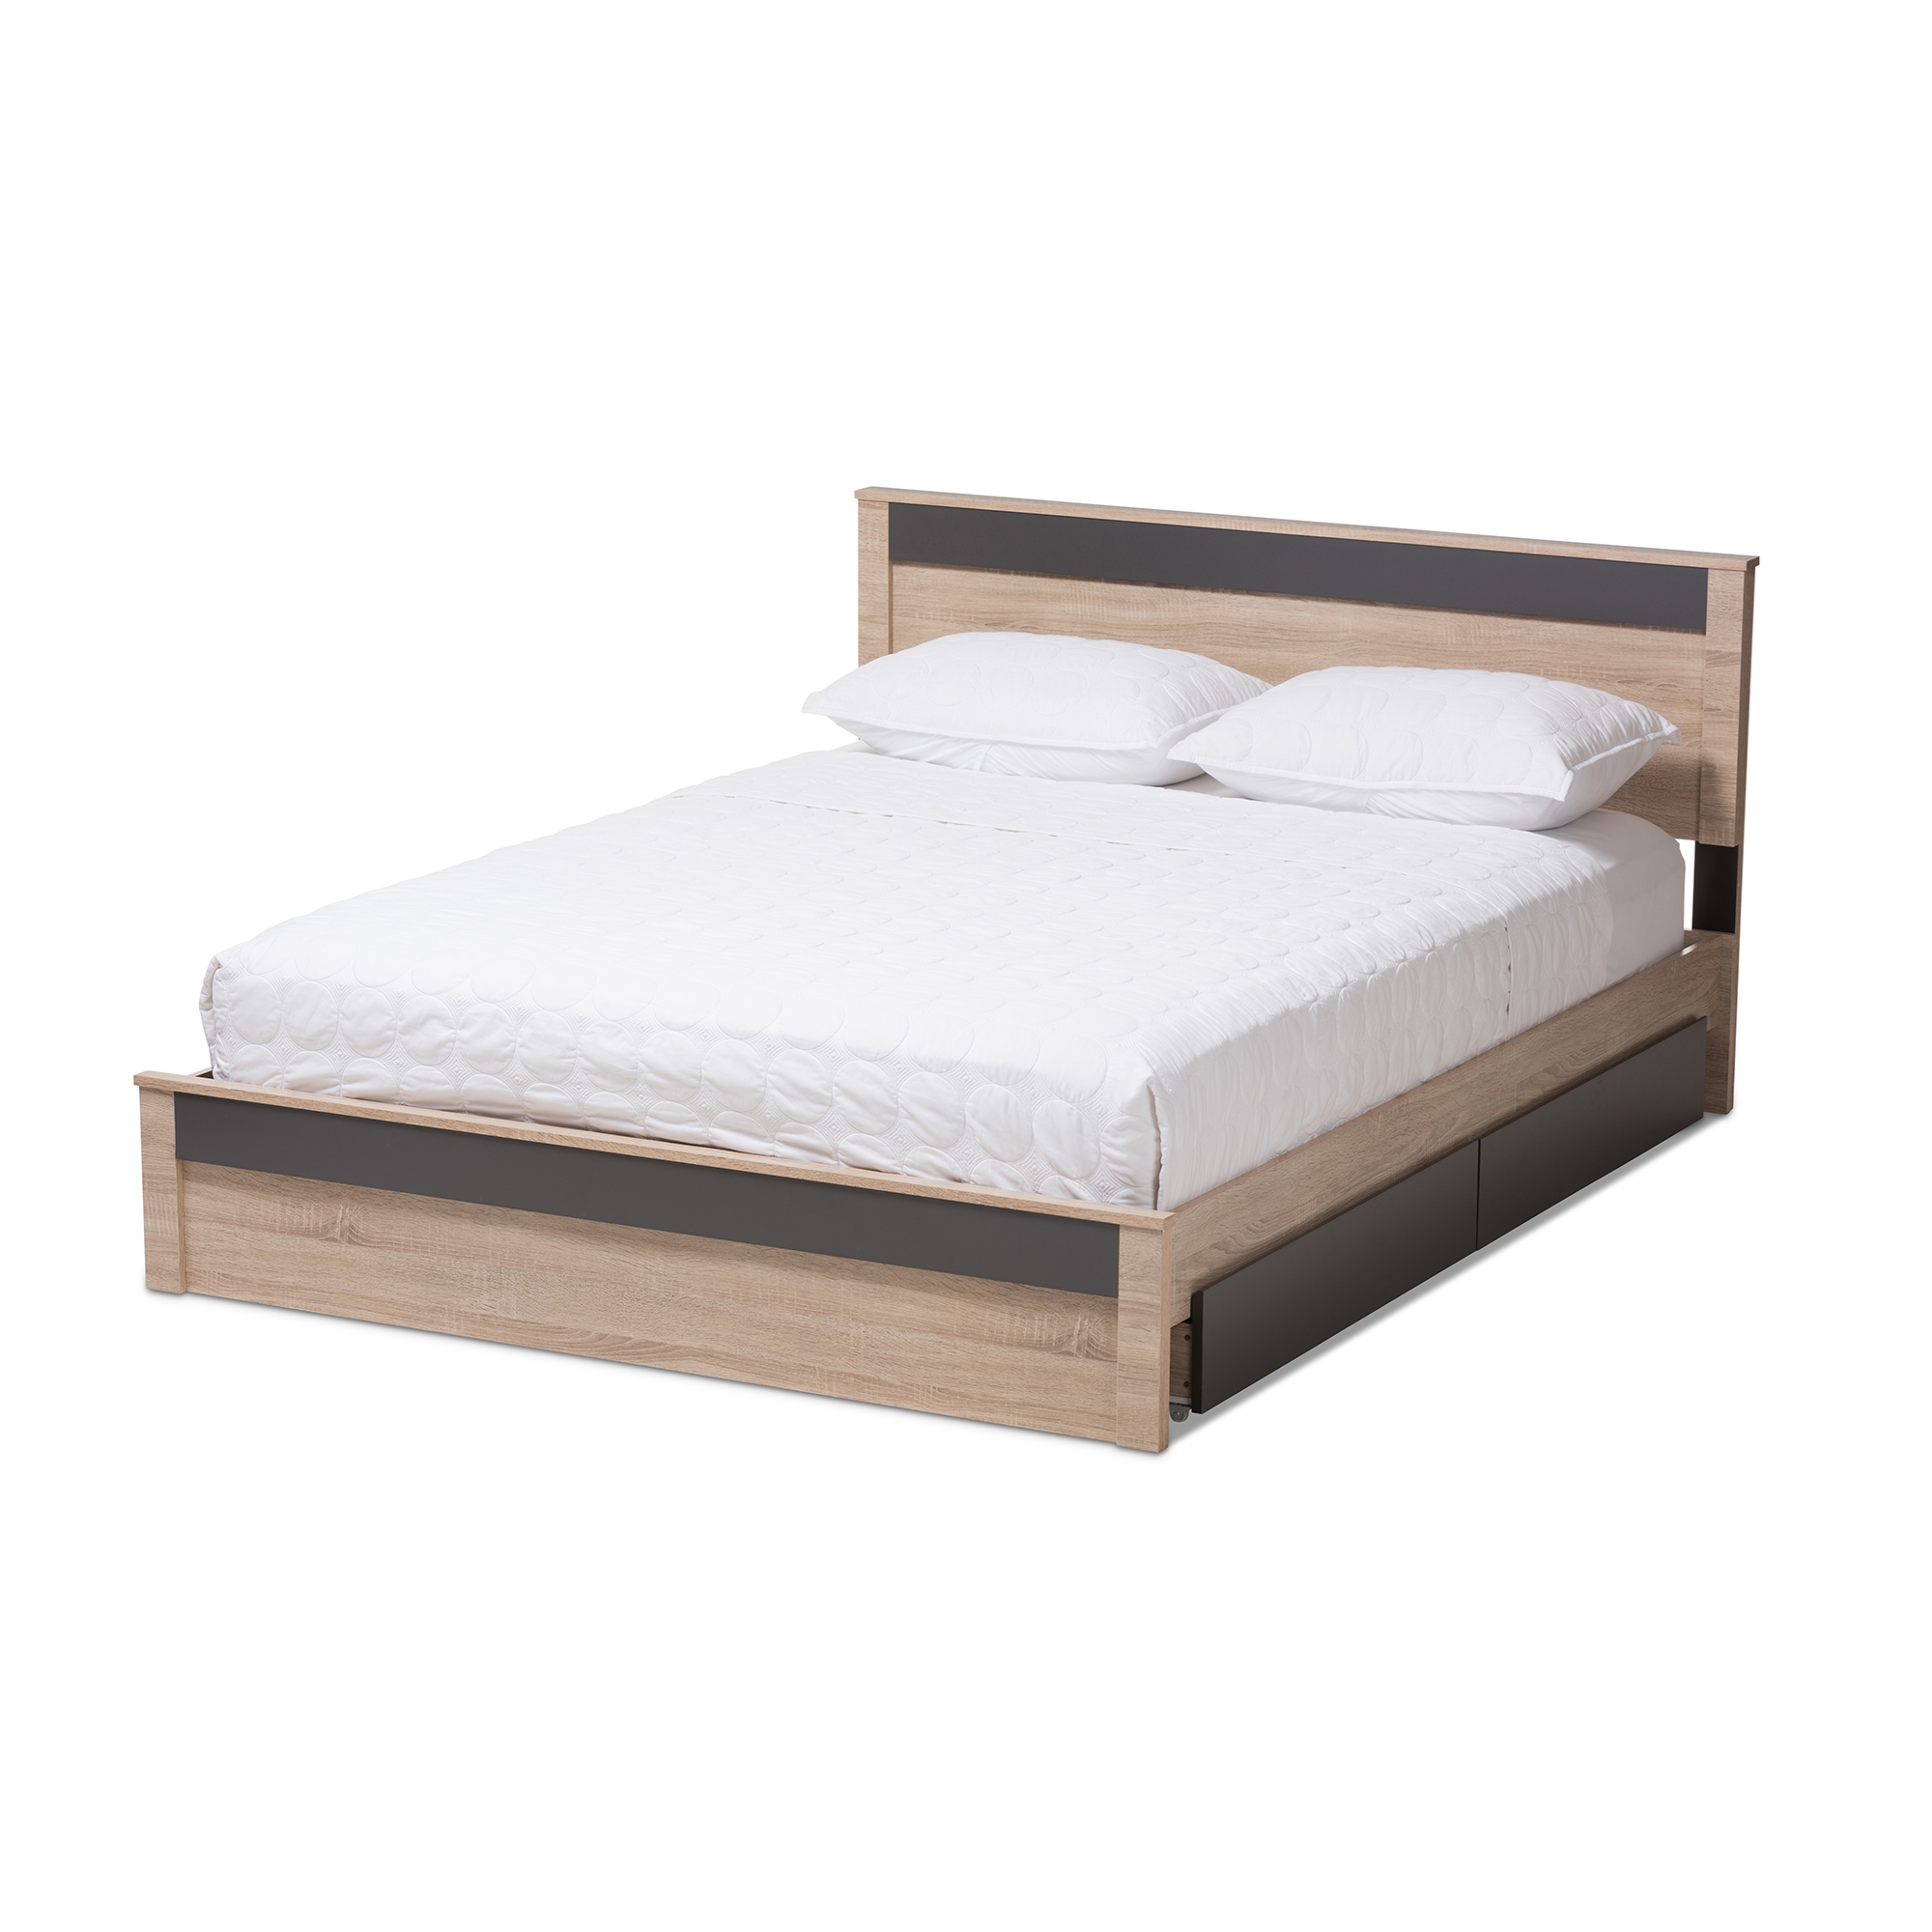 Queen Full Size Bed Frame Wood Bedroom Furniture Platform With 2 Drawers Storage 